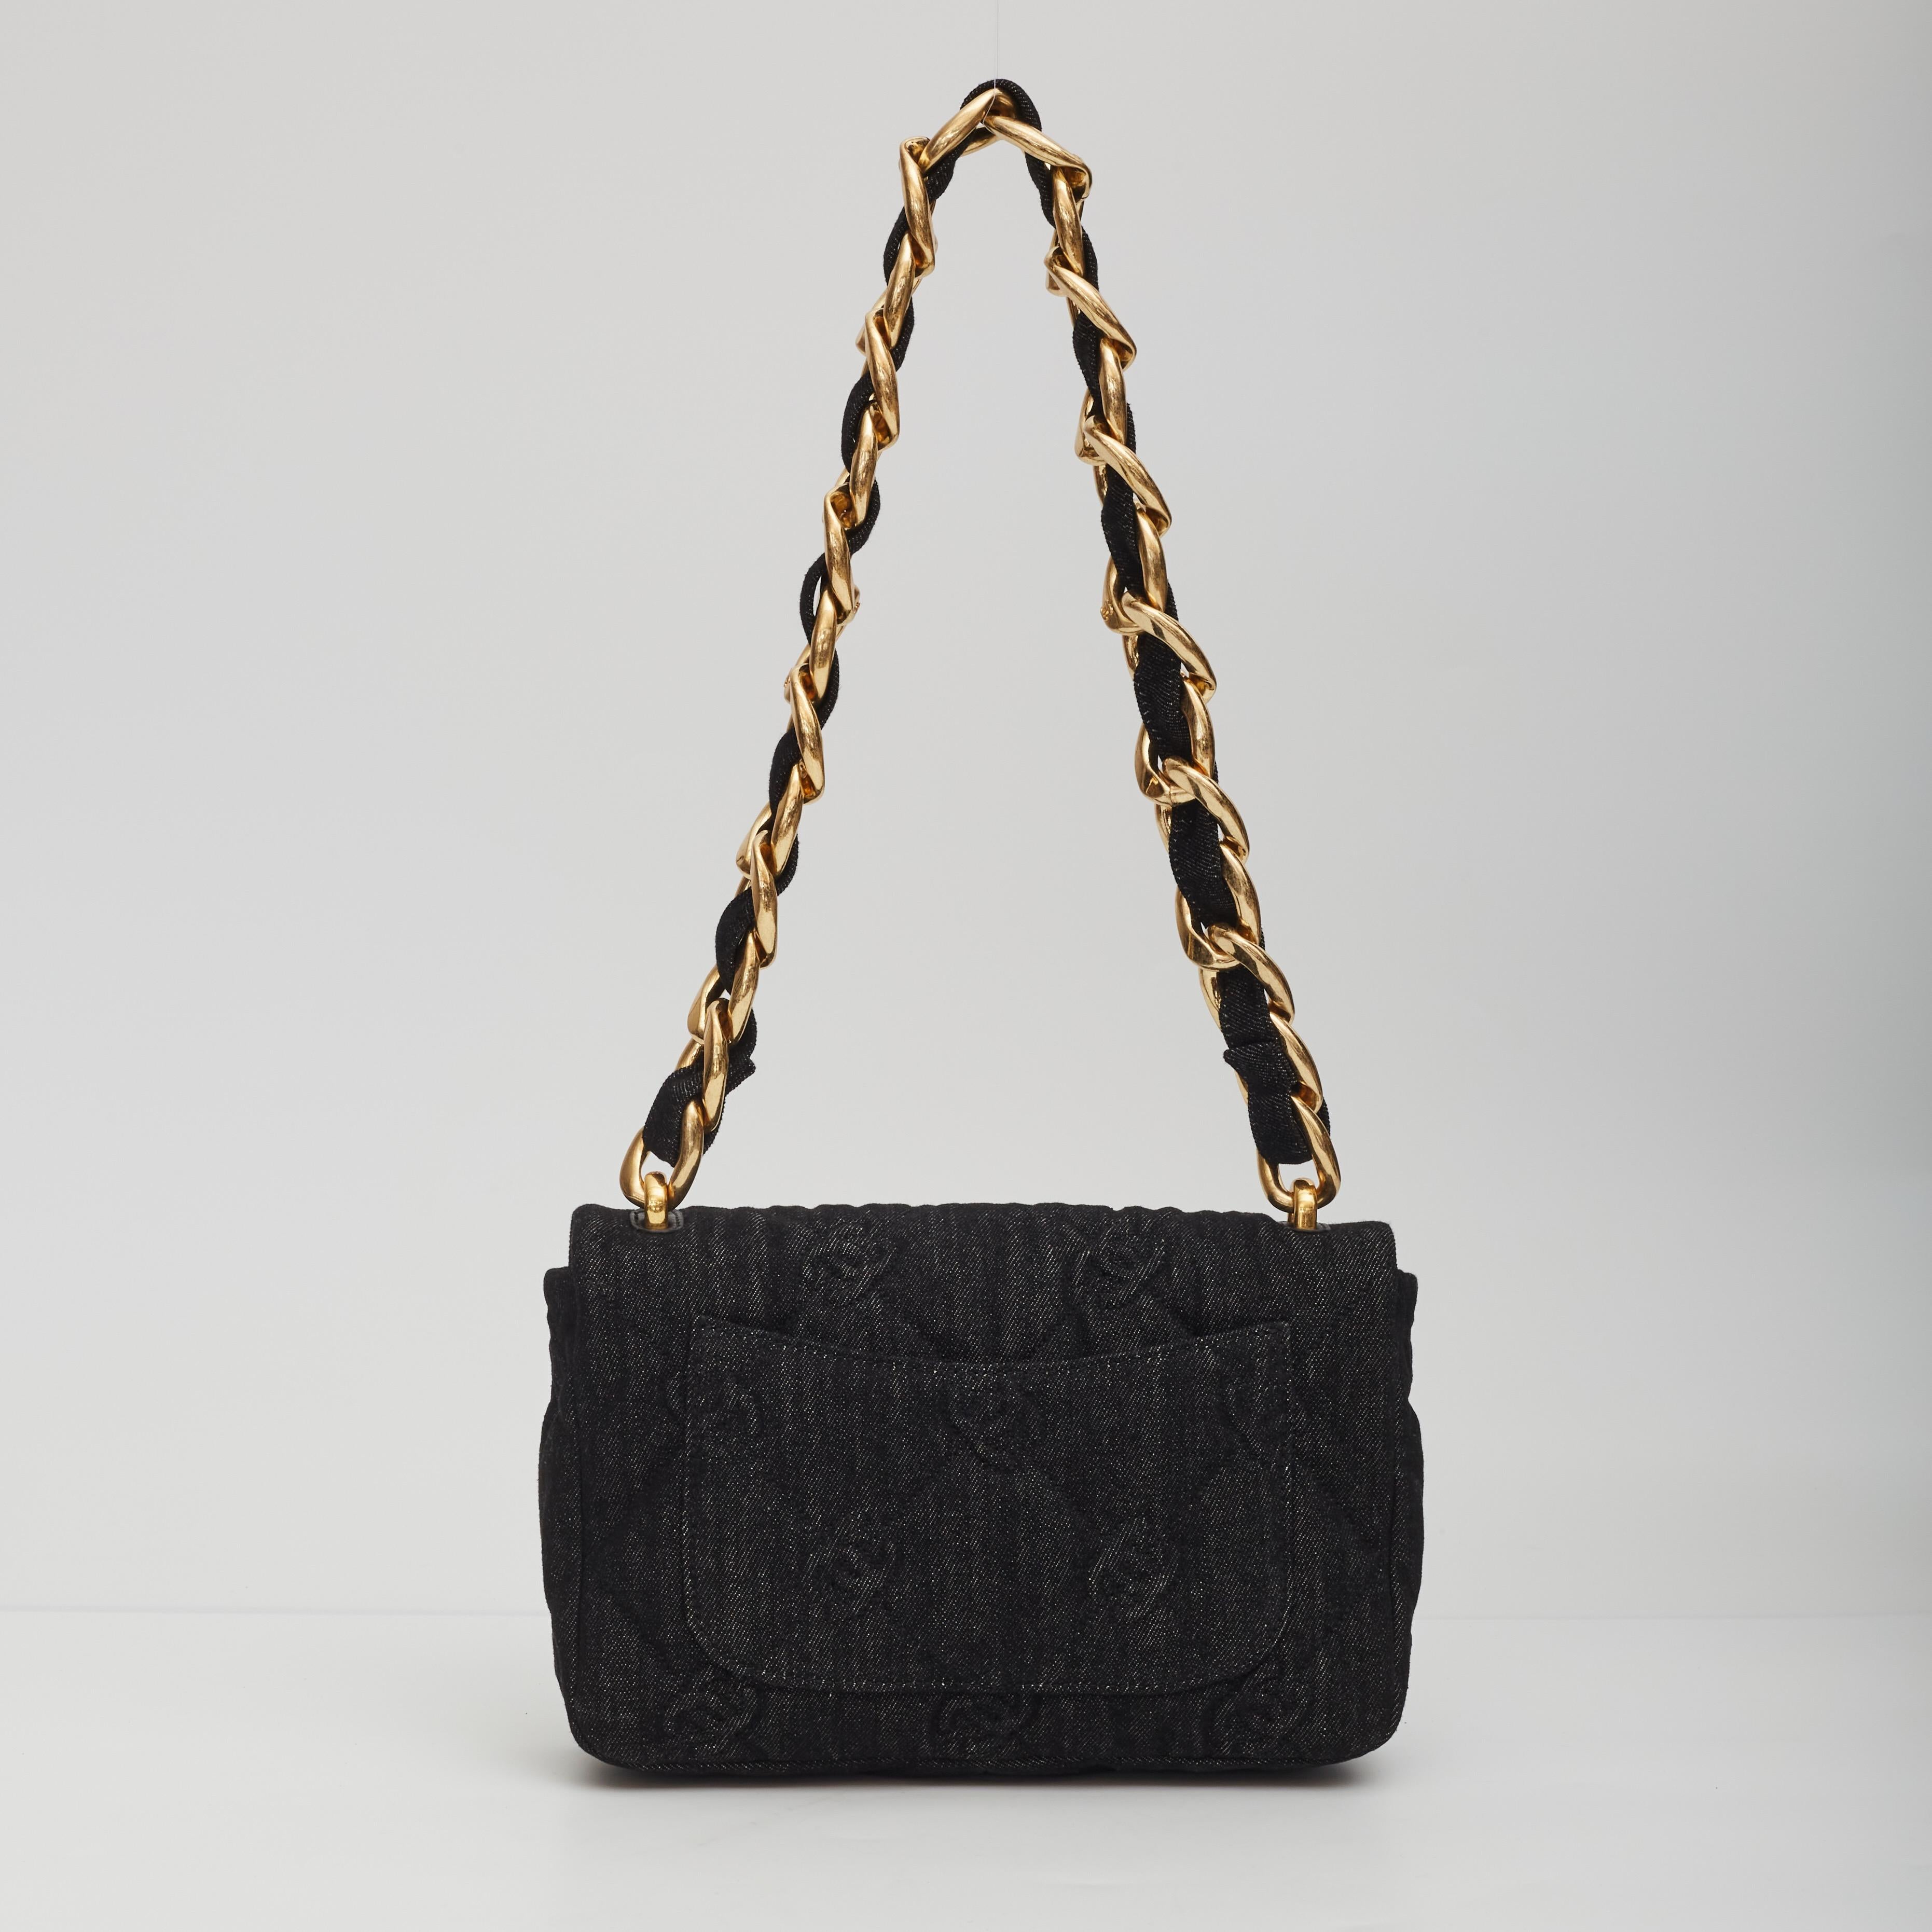 This piece was featured during the 2022 spring-summer ready-to-wear collection. The bag is made of a deep blue/black denim and features an over sized gold tone chain interlaced with denim, a front flap with cc turn lock closure, diamond quilting